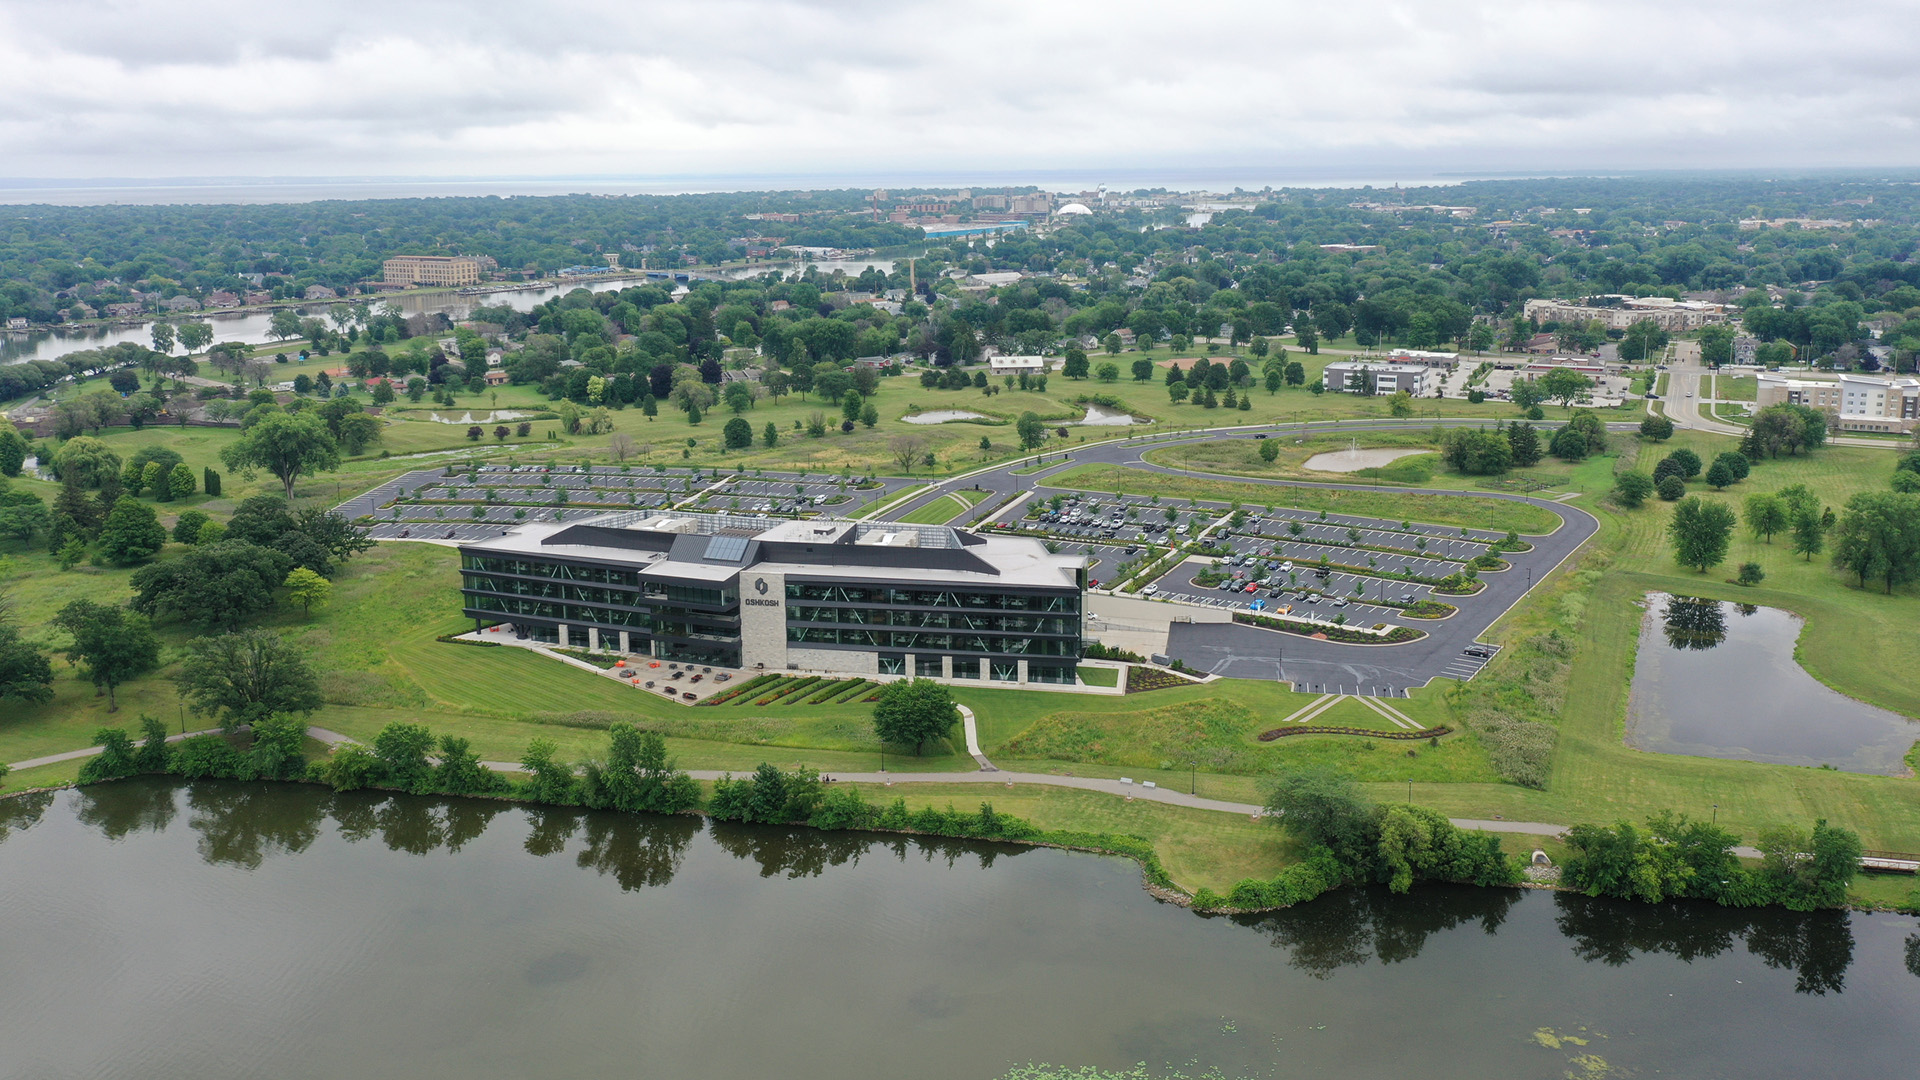 An aerial photo shows a multi-story office building and large adjacent parking lots standing in the midst of fields with green turf and numerous trees, with a lakeshore in the foreground and a forested urban landscape in the background.